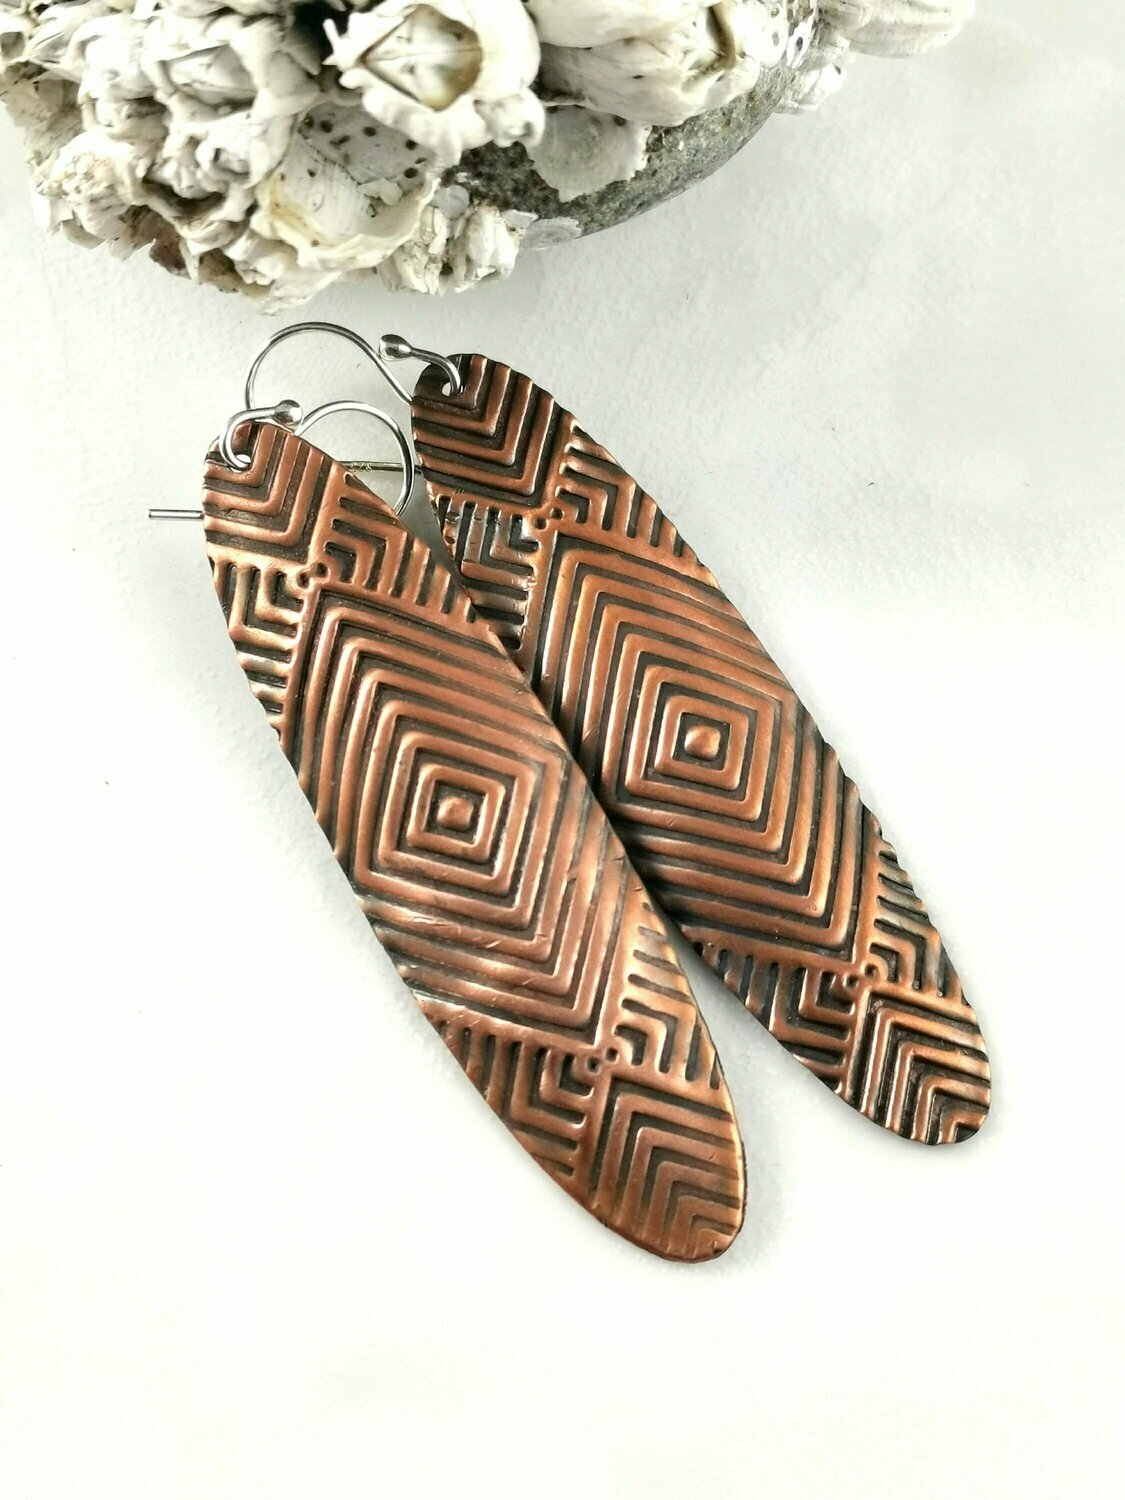 Funky Long Oval RETRO Tribal Textured Copper Earrings with a Deep Rich Patina